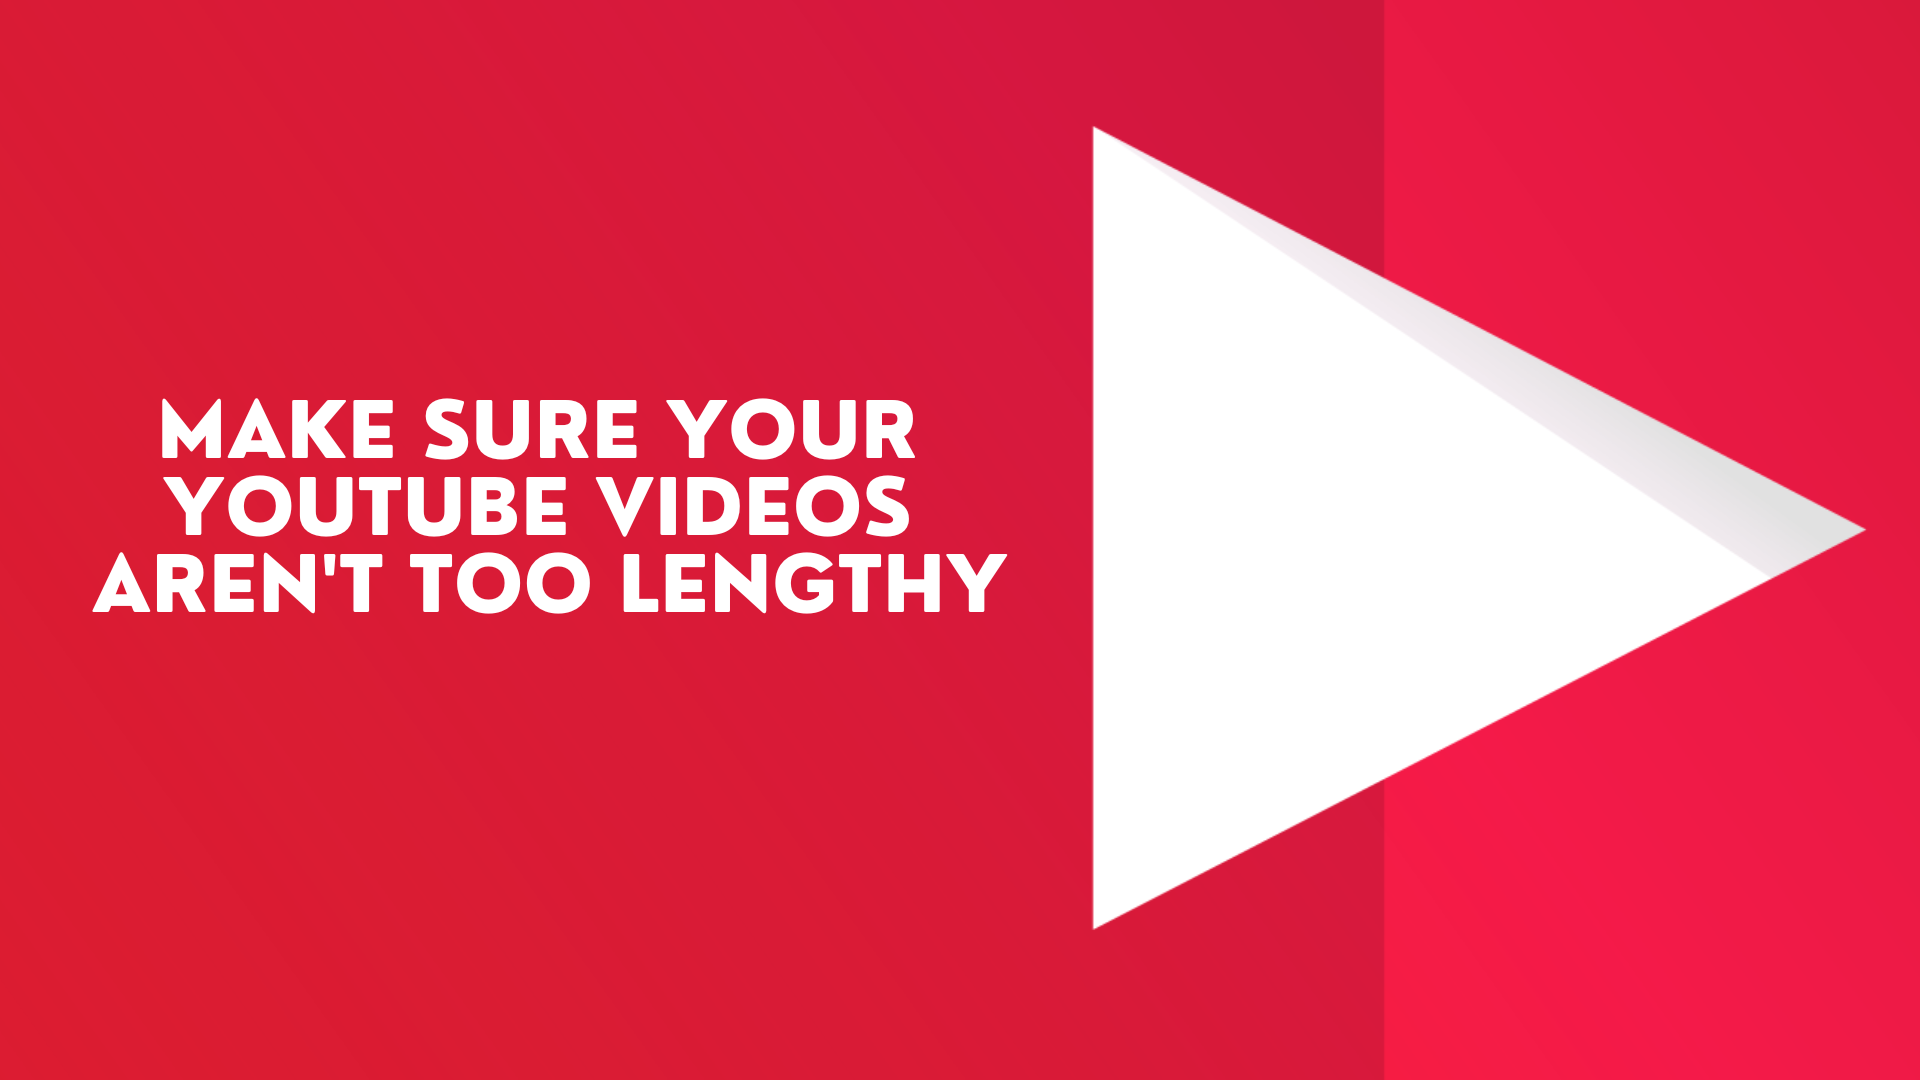 Make sure your YouTube videos aren't too lengthy - Tips to Make Your YouTube Videos Go Viral